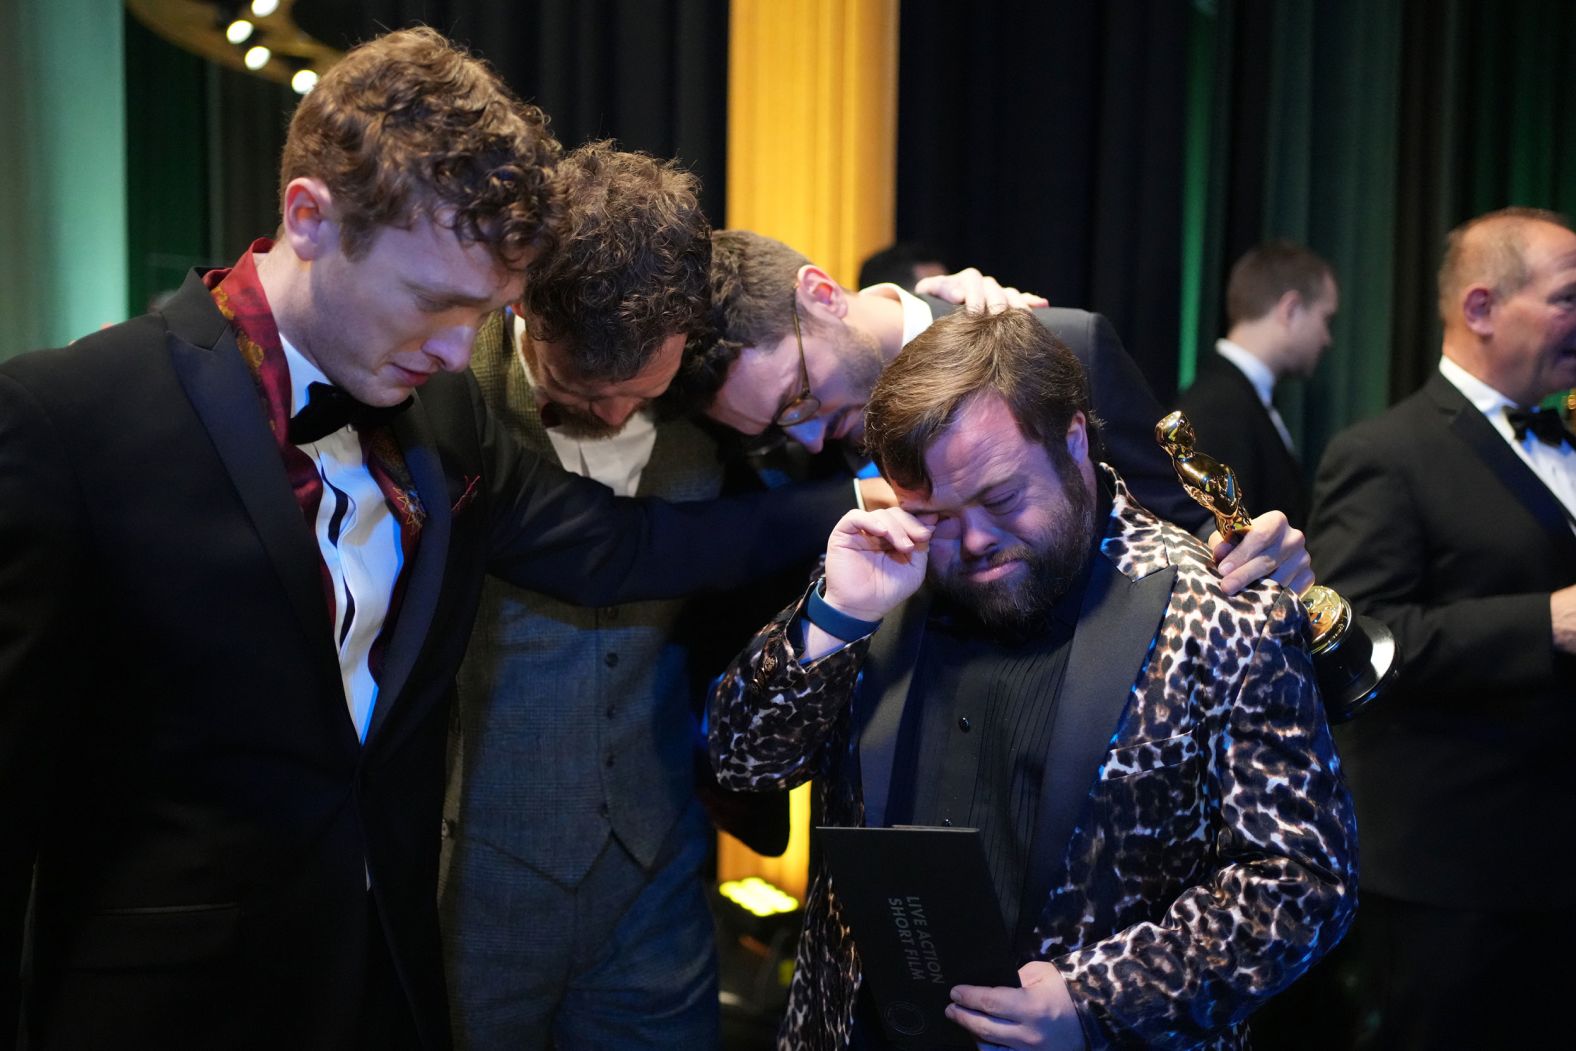 Ross White, Seamus O'Hara, Tom Berkeley and James Martin share an emotional moment backstage after "The Irish Goodbye" won the Oscar for best live action short film. Martin, right, received an <a href="index.php?page=&url=https%3A%2F%2Fwww.cnn.com%2Fentertainment%2Flive-news%2Foscars-2023%2Fh_c29518f5916f2f49ab1837b26752a0a4" target="_blank">unexpected surprise</a> during the acceptance speech. His co-stars told the audience that they wanted to sing him "Happy Birthday," and they did. The audience sang along.